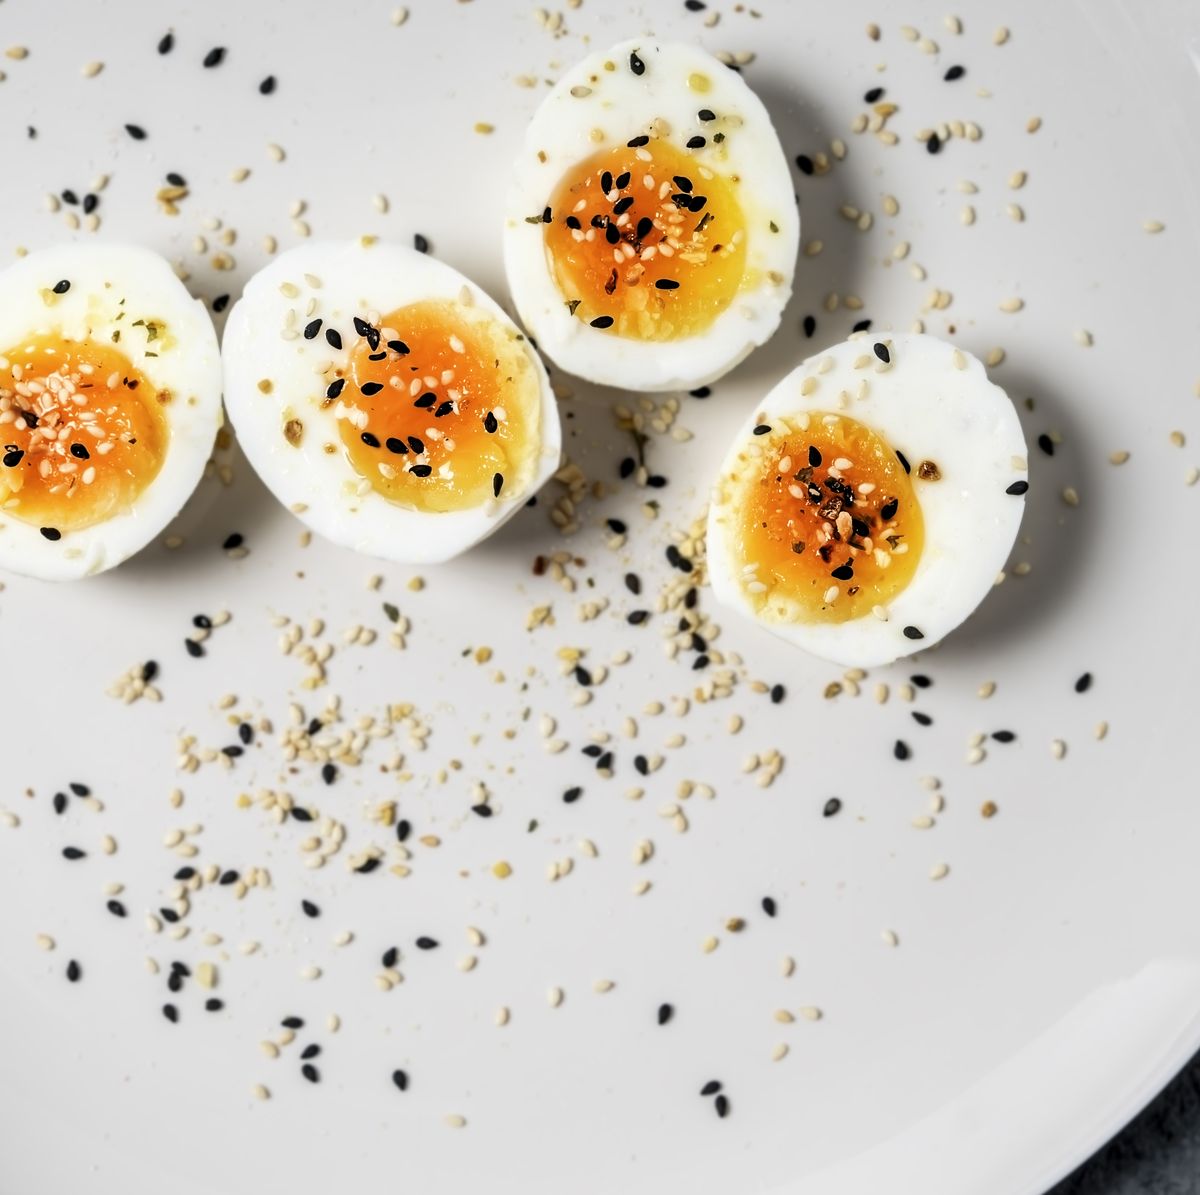 https://hips.hearstapps.com/hmg-prod/images/halved-hard-boiled-eggs-on-a-plate-royalty-free-image-1625148593.jpg?crop=0.681xw:1.00xh;0.0881xw,0&resize=1200:*